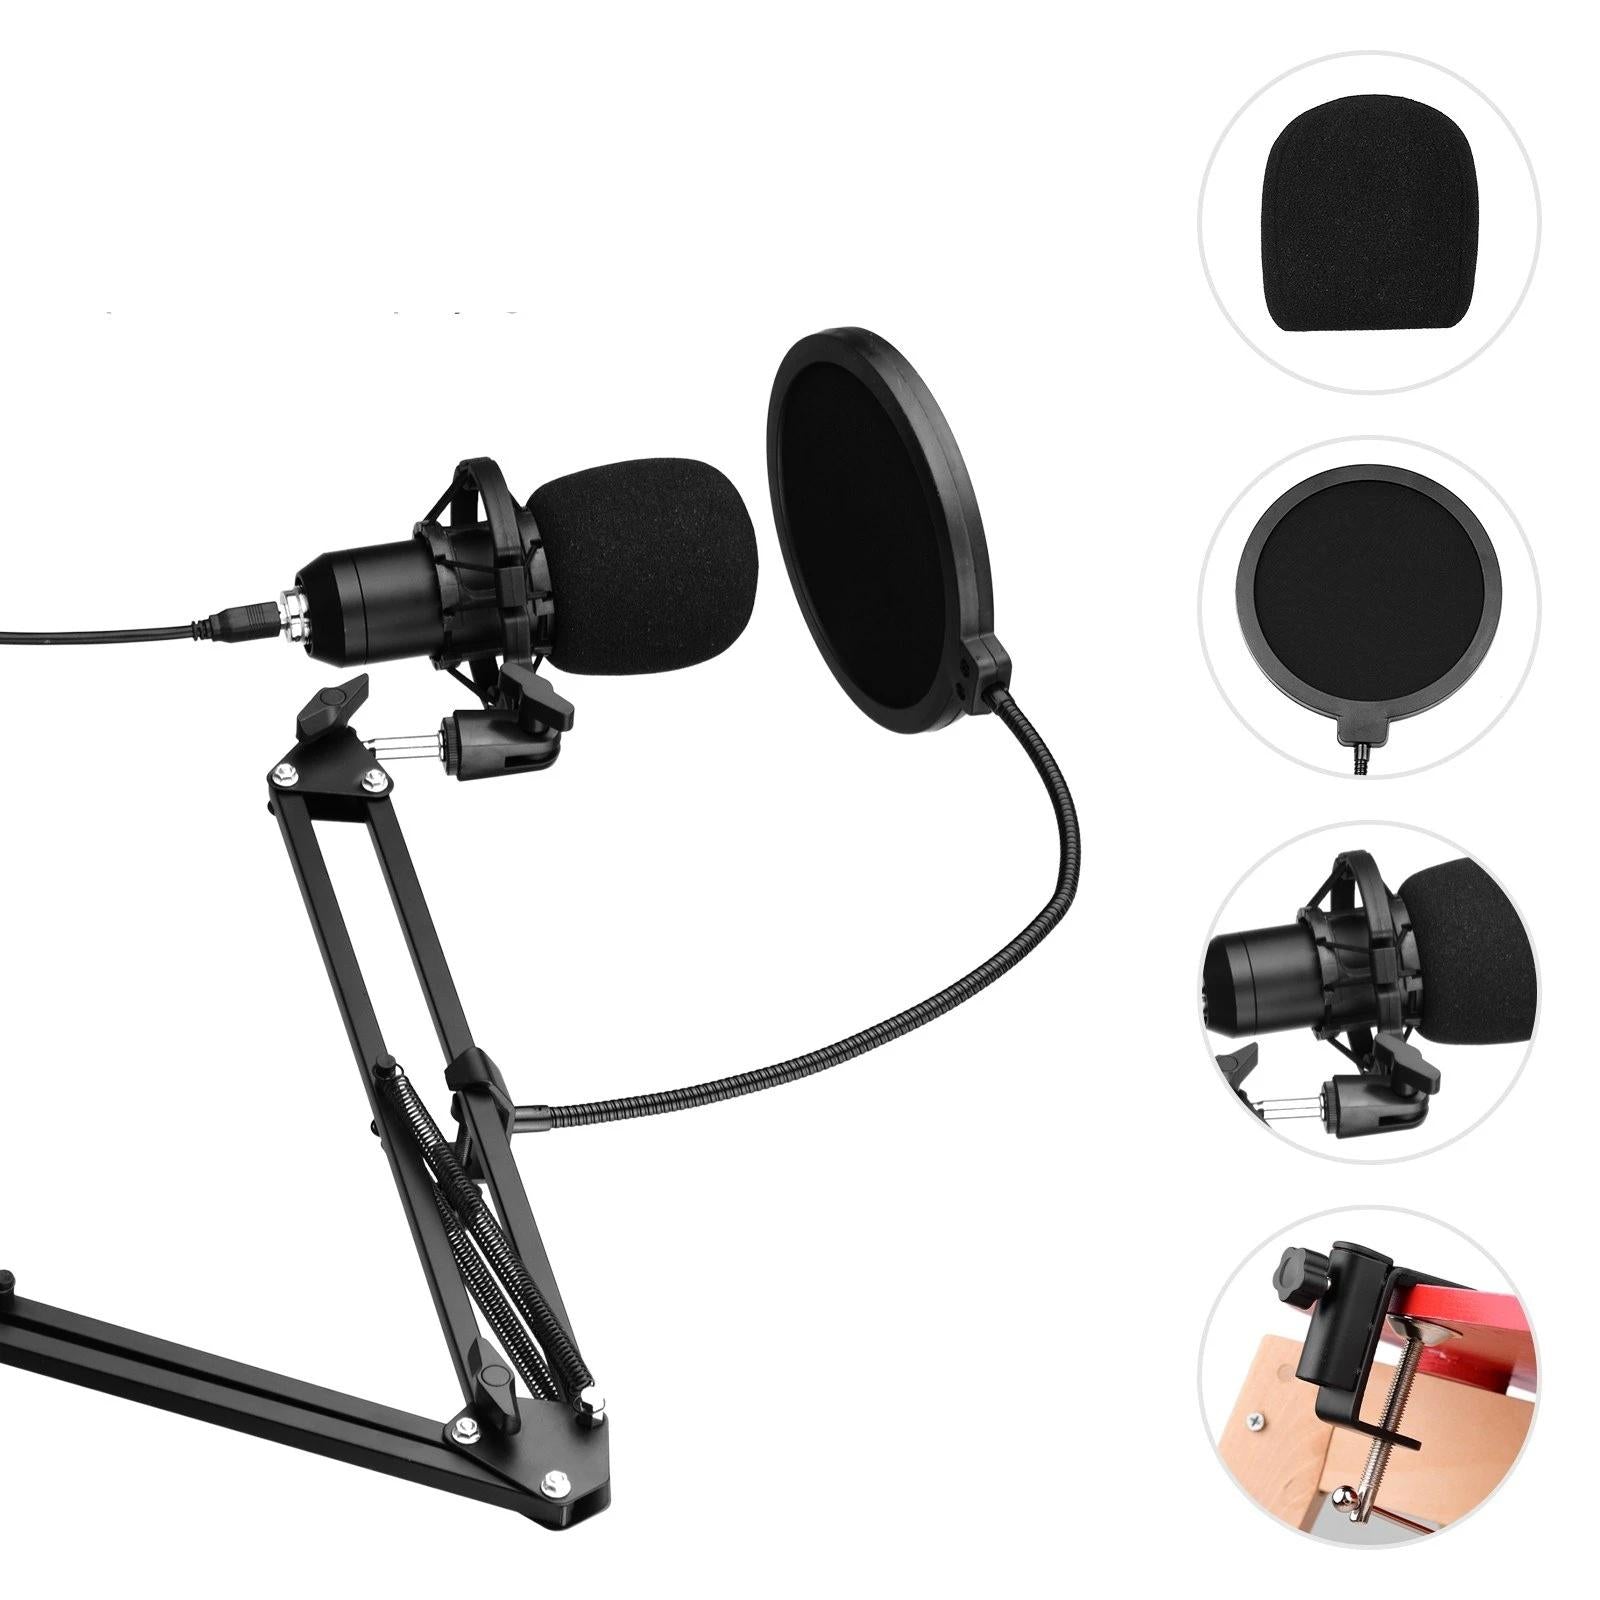 USB Condenser Microphone Set with Desk Mounting Clamp Scissor Arm Stand Pop Filter Muff Shock Mount Cable